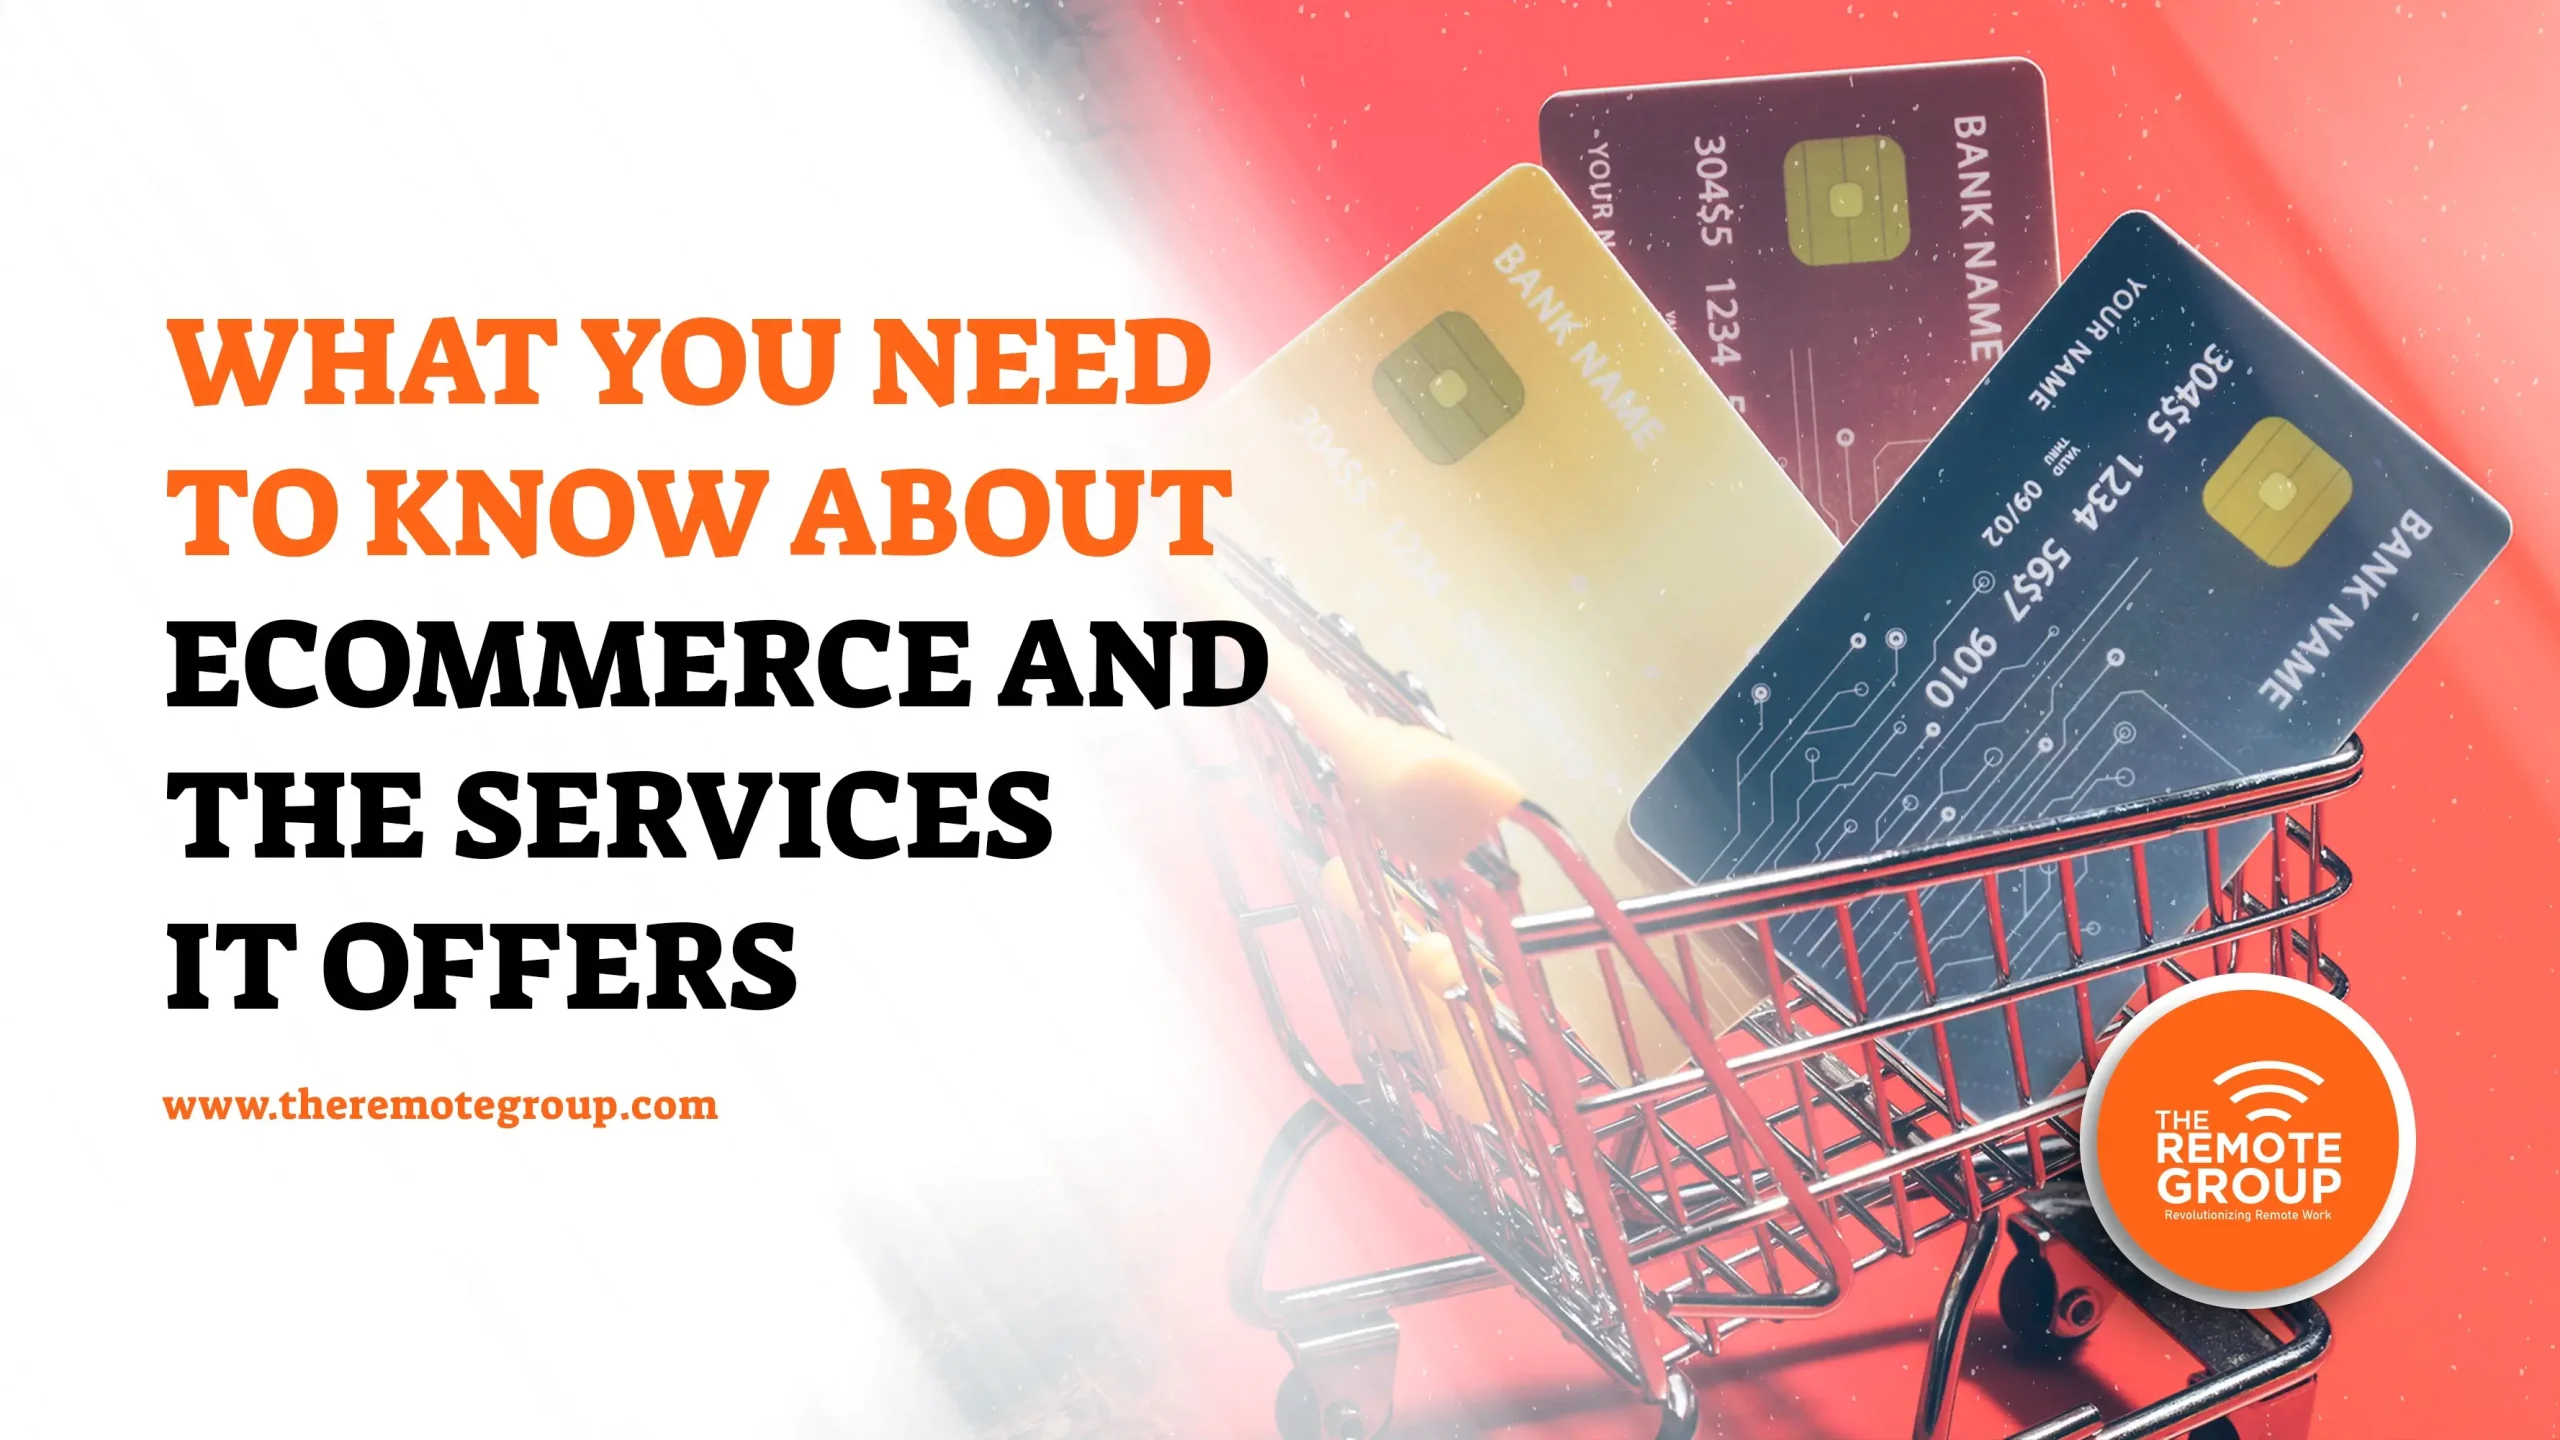 What You Need To Know About eCommerce and the Services It Offers